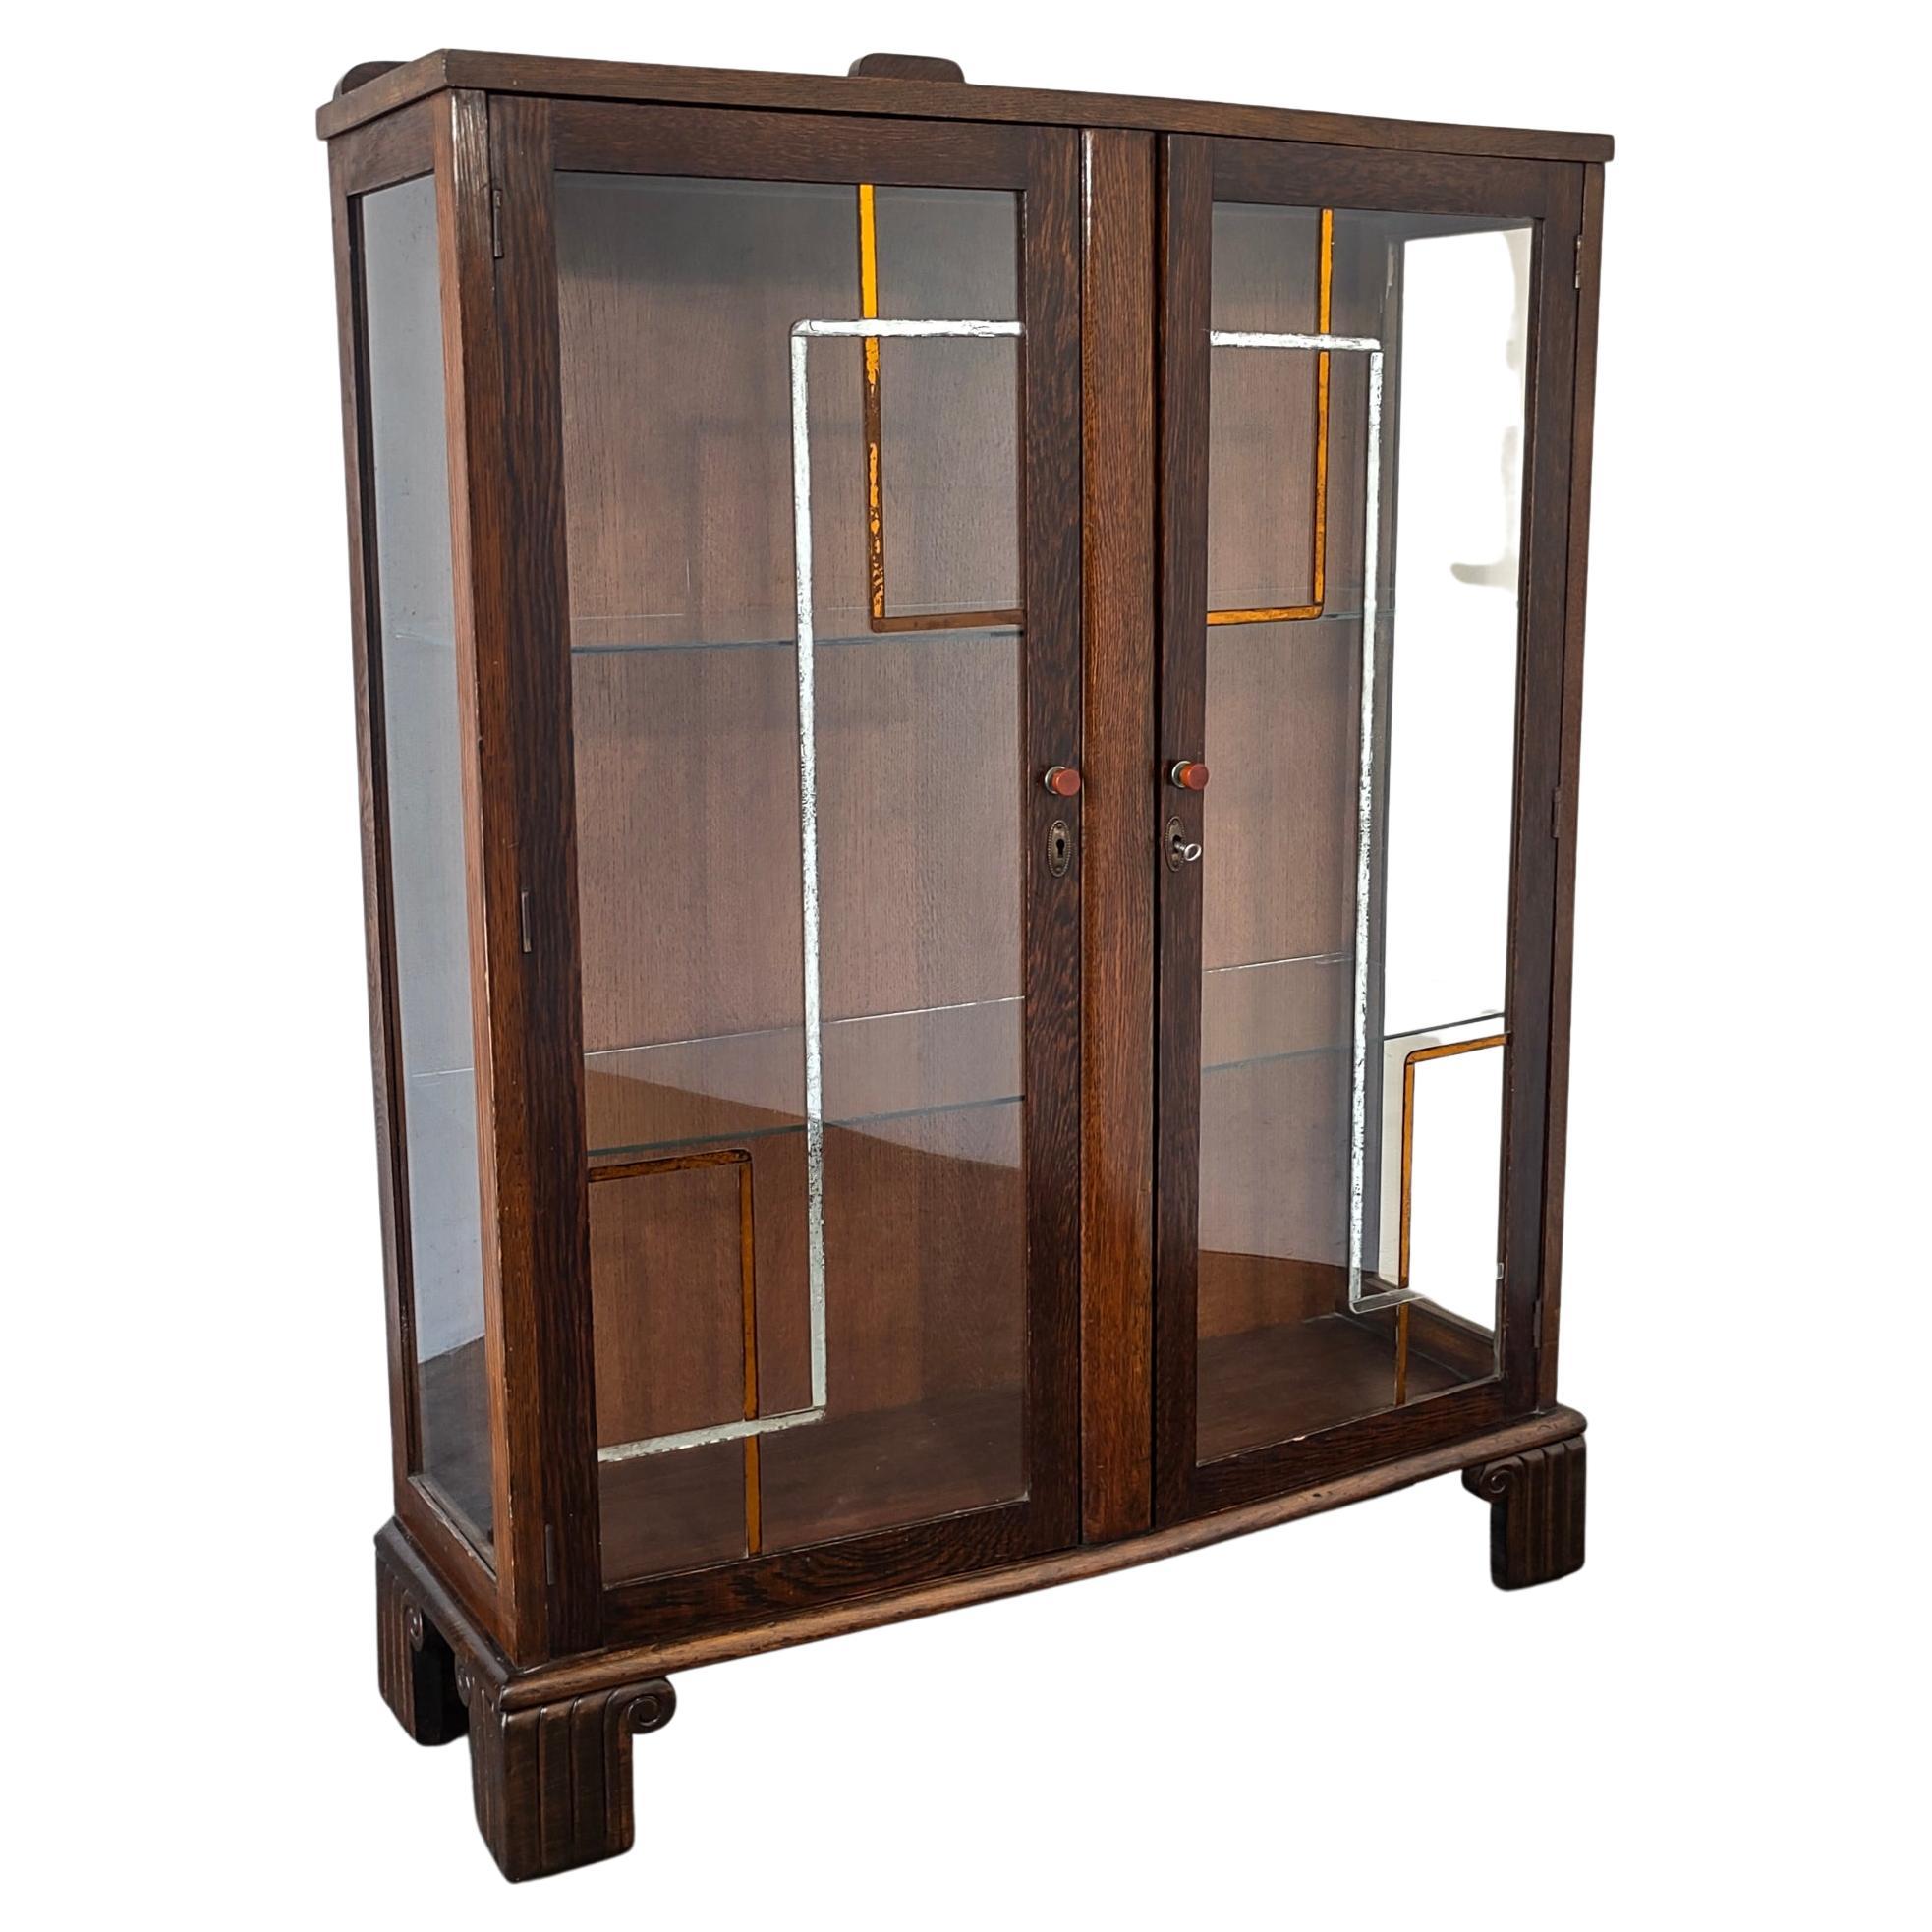 1920s Art Deco Glass Display Cabinet Curio with Decorative Mirror Details